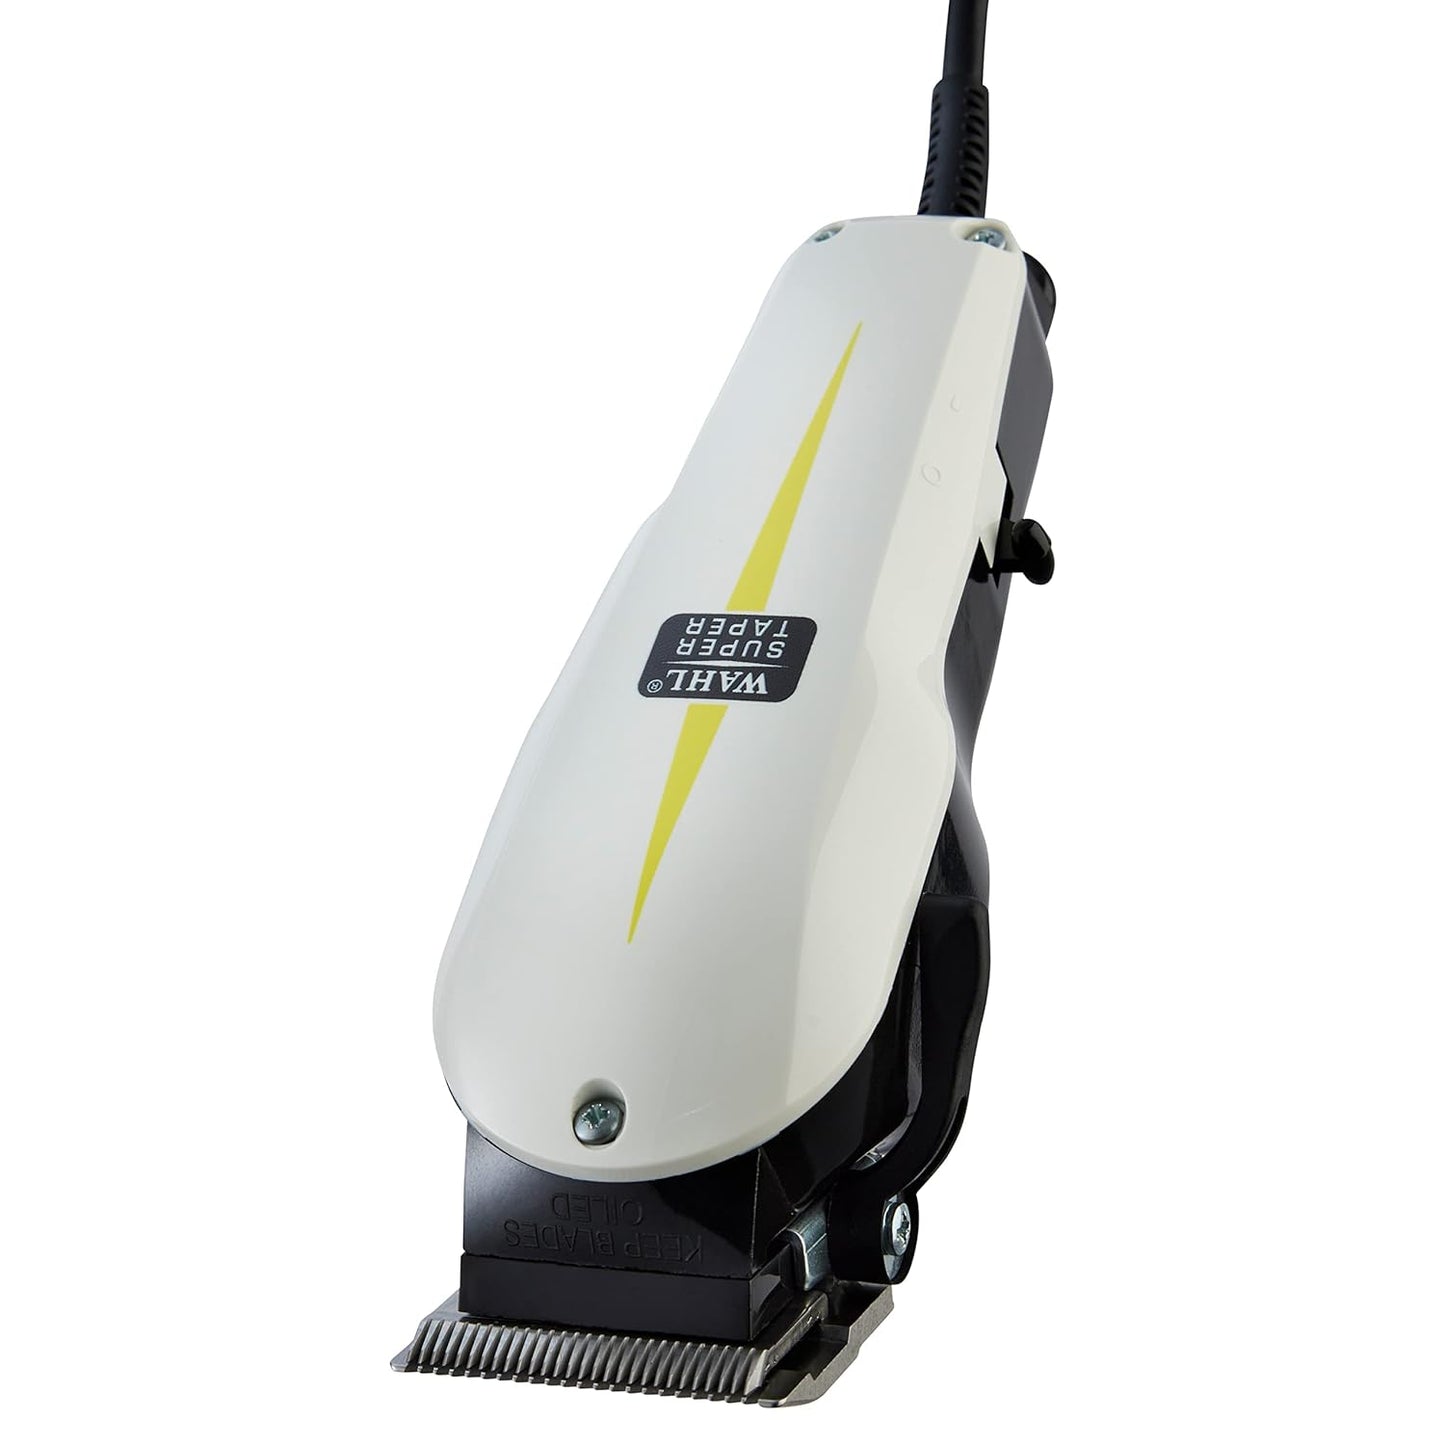 Wahl Professional Super Taper Hair Clipper with Full Power and V5000 Electromagnetic Motor for Professional Barbers and Stylists - Model 8400